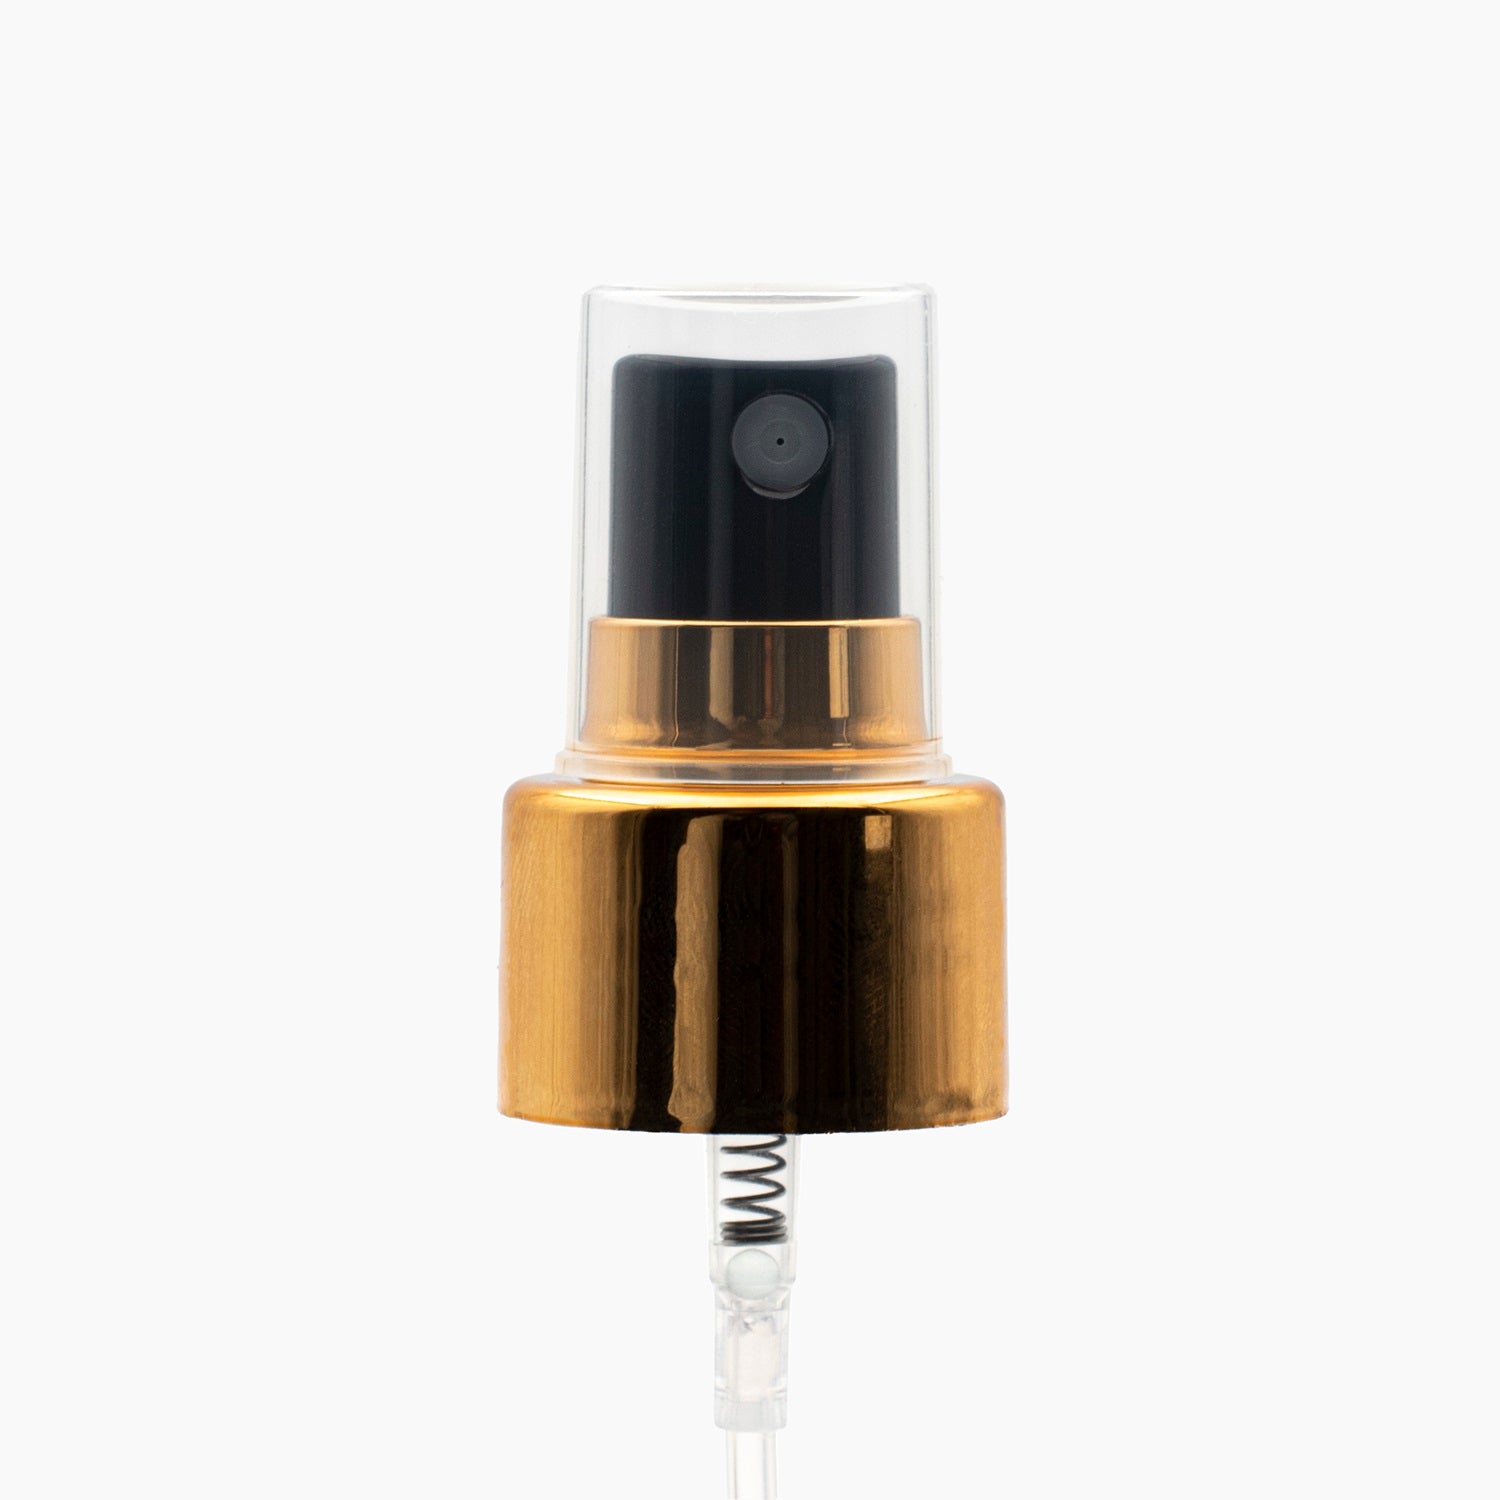 Gold Collar Black 24mm Plastic Mist Spray Cap On White Background | Brightpack Closures And Accessories